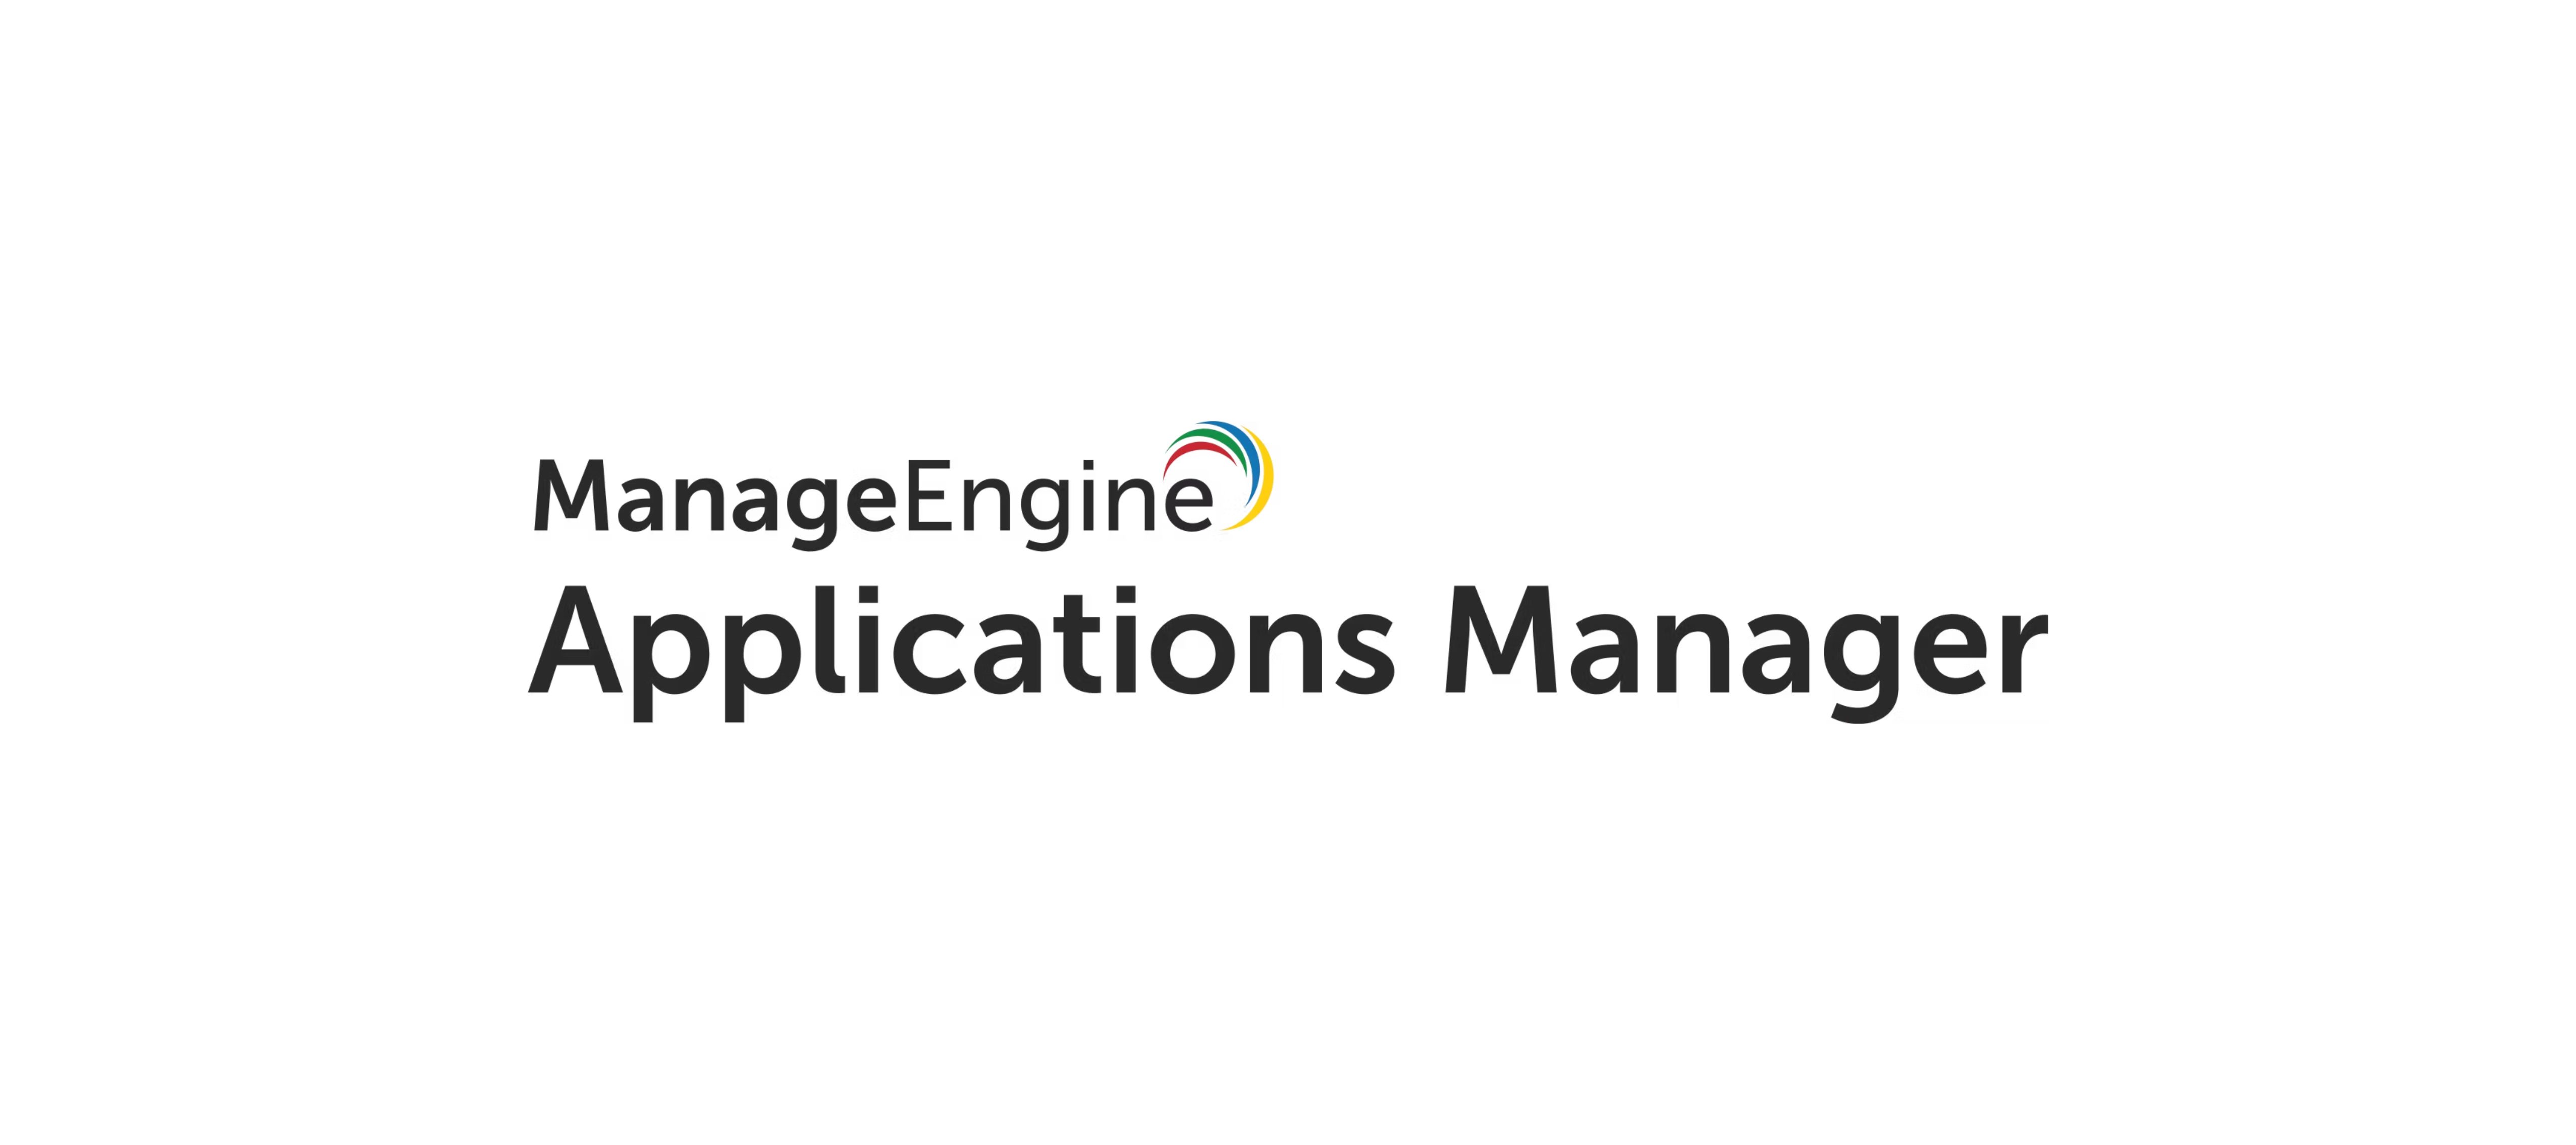 ManageEngine Applications Manager